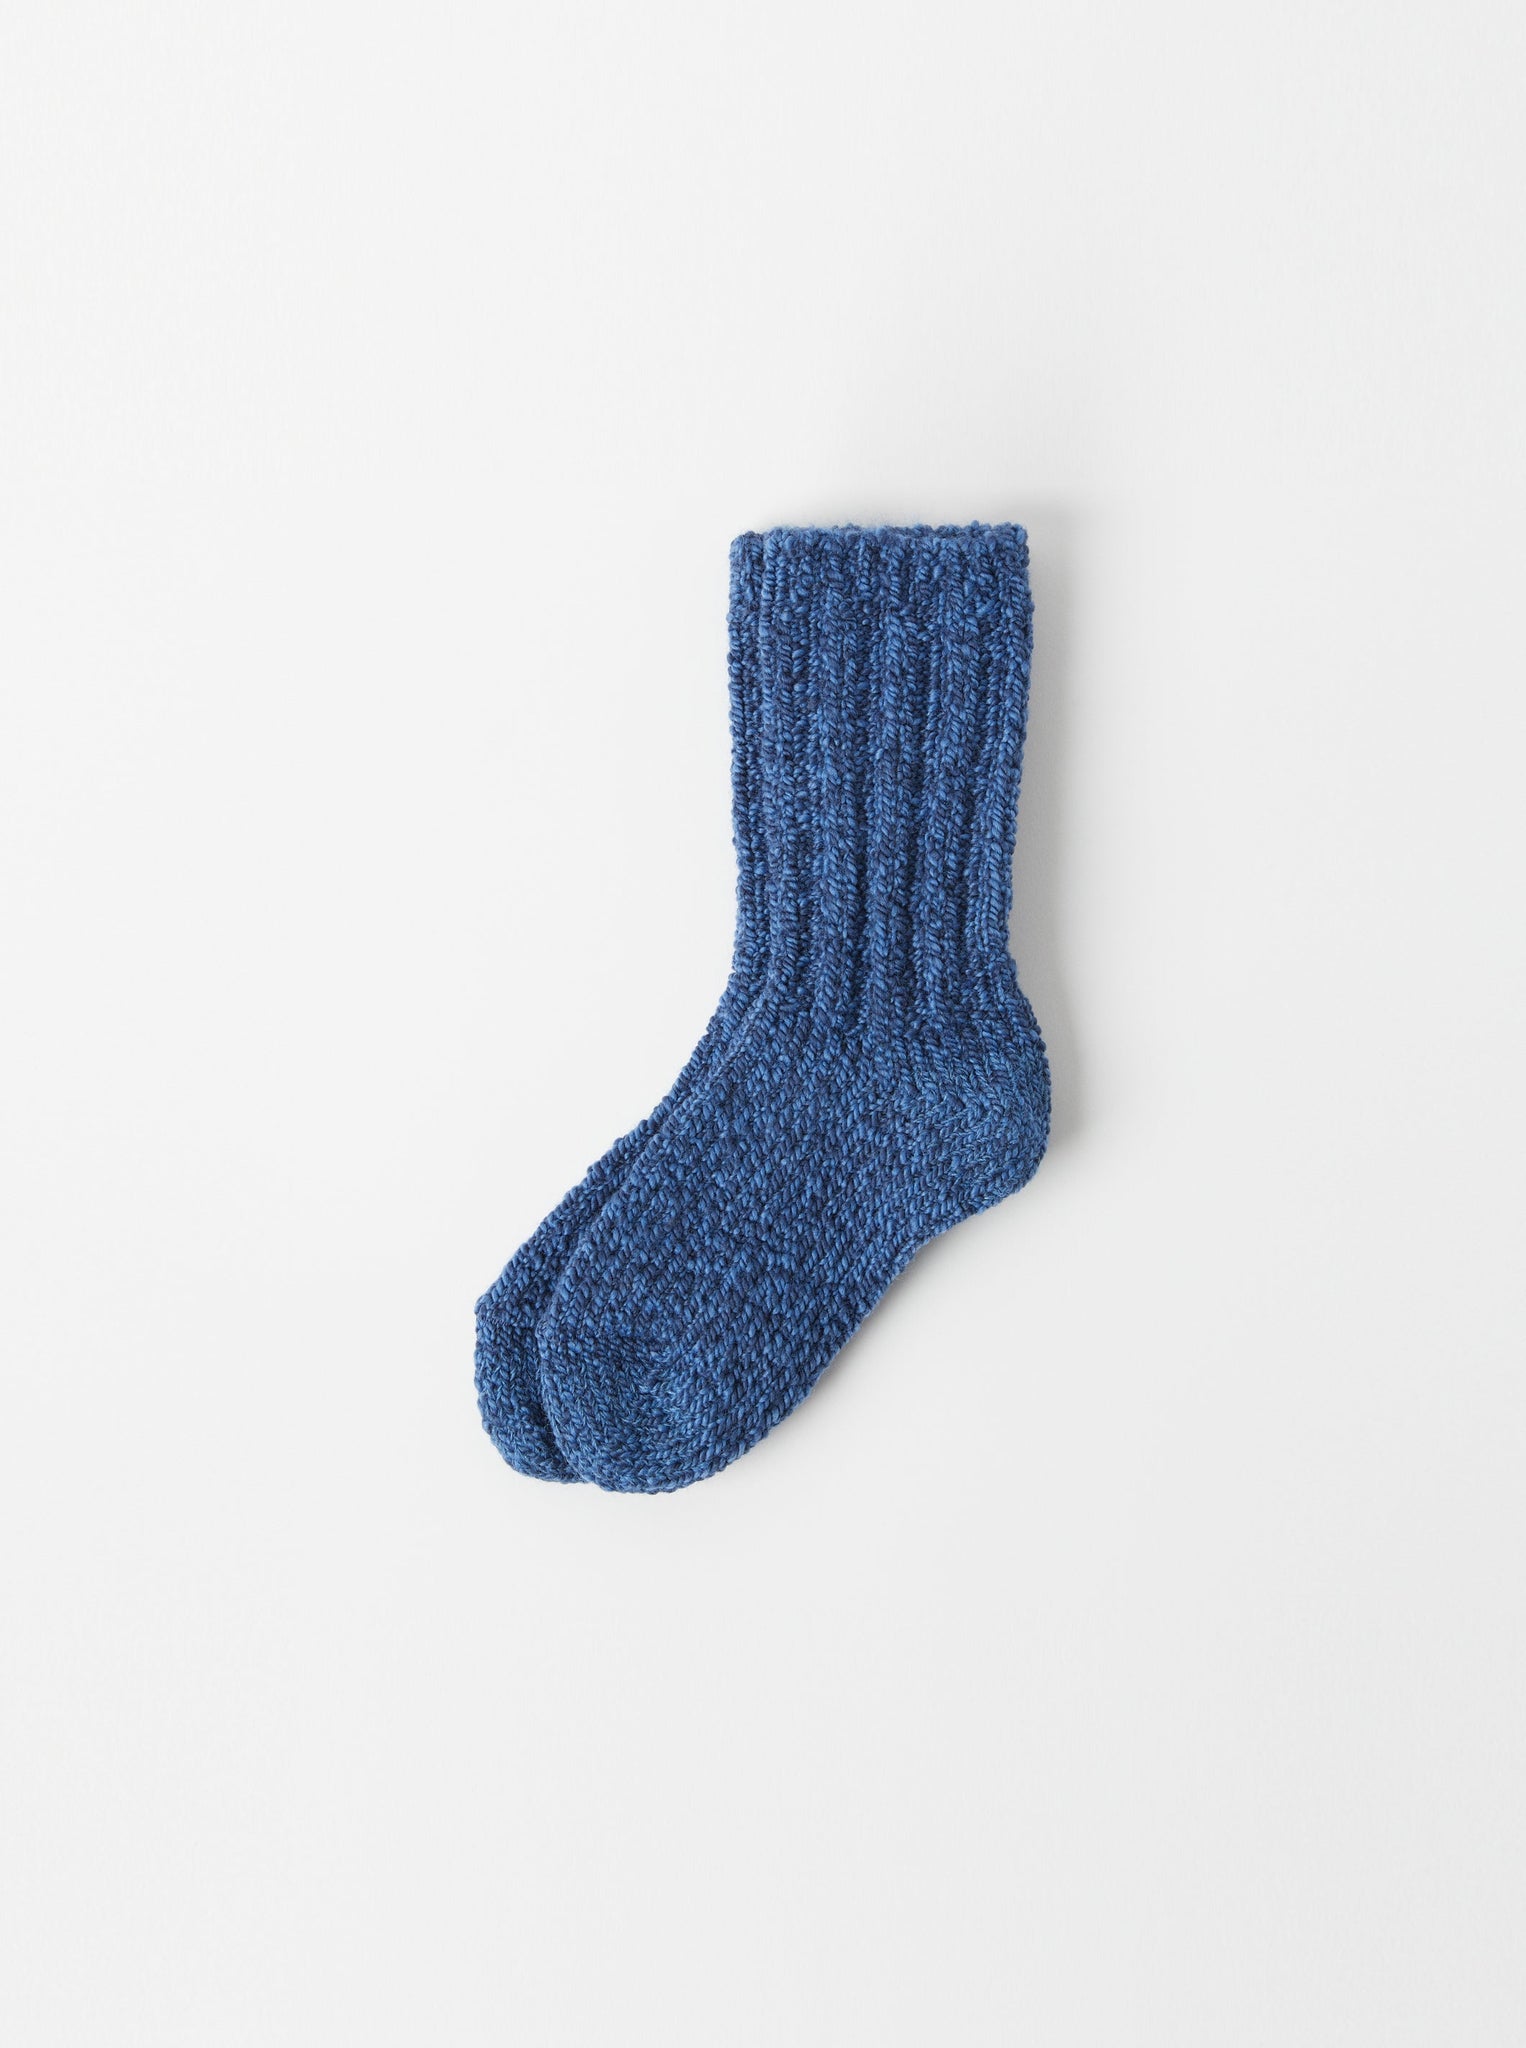 Blue Kids Thick Wool Socks from the Polarn O. Pyret kidswear collection. Made using ethically sourced materials.